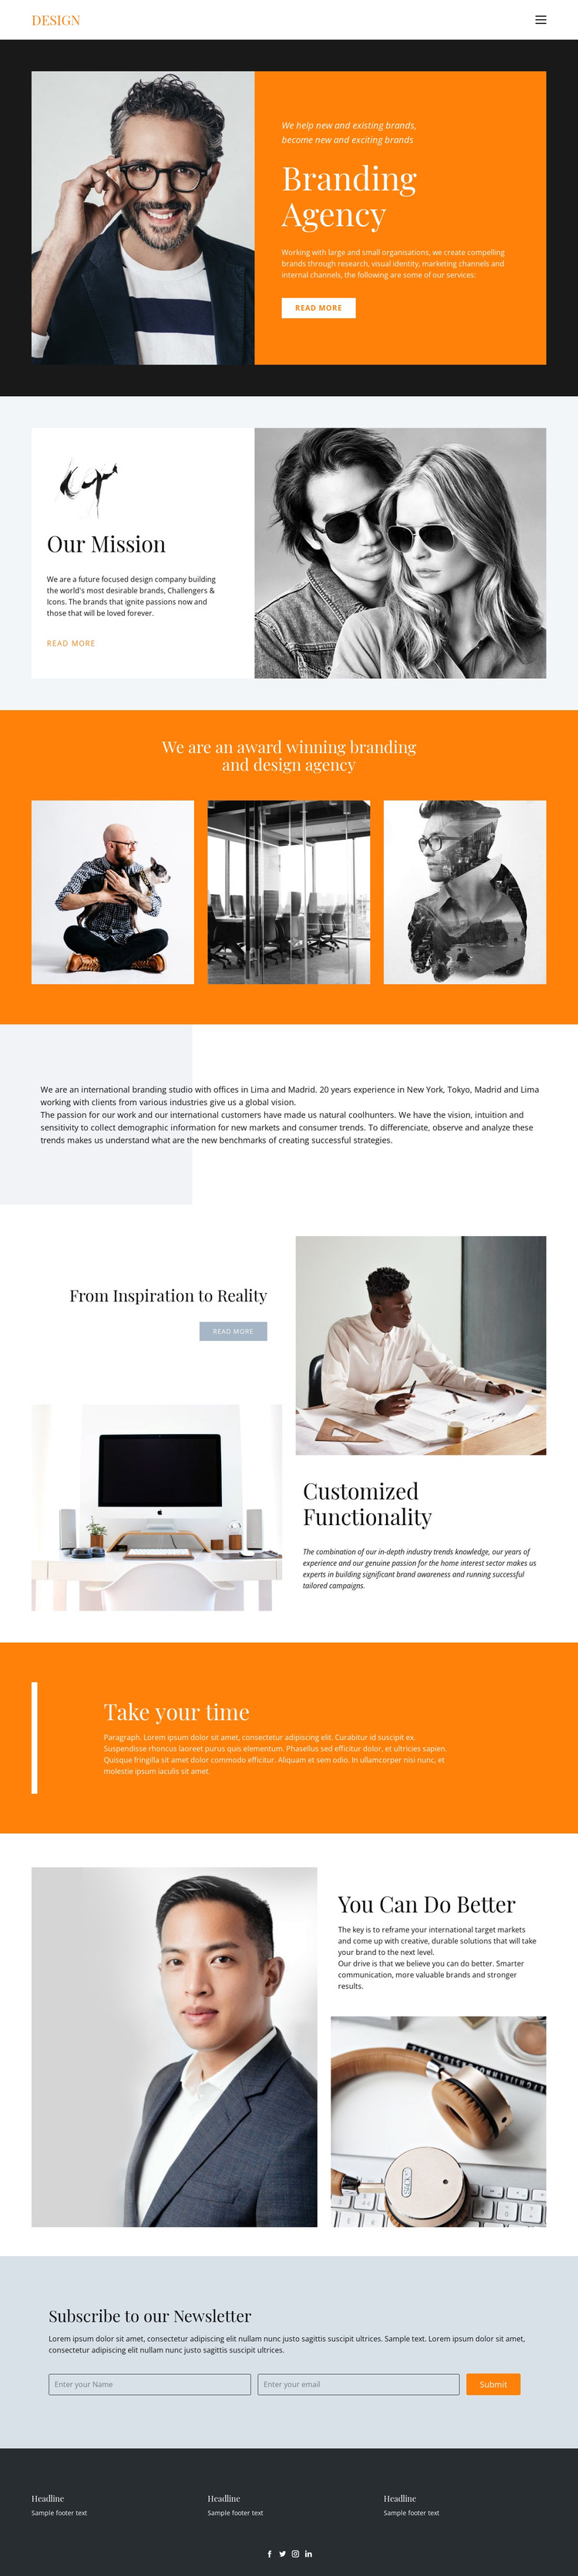 Desired results in business HTML5 Template